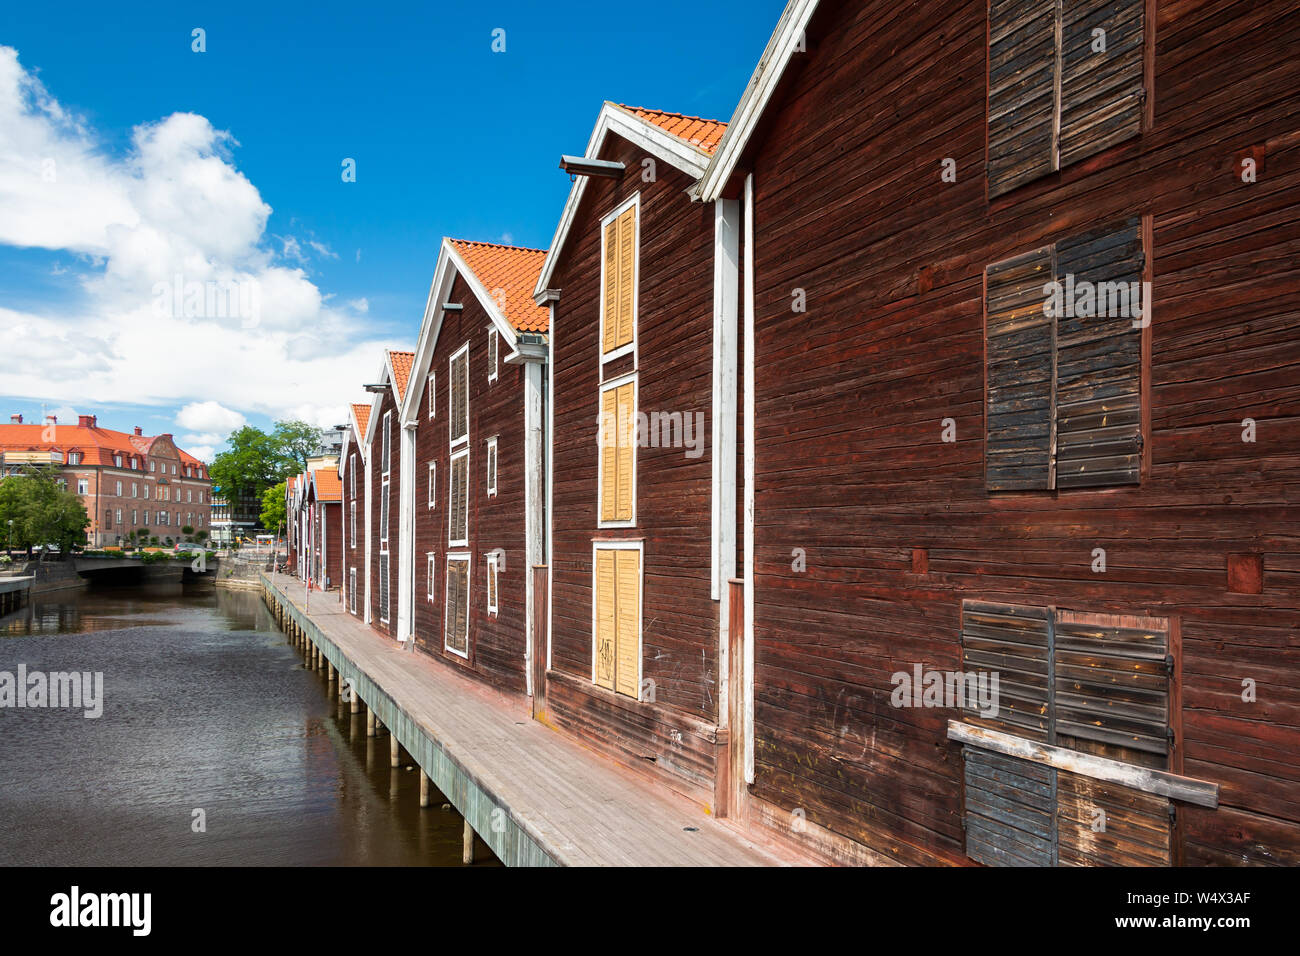 Hudiksvall a city in the province Gävleborgs län, east Sweden with beautiful wooden houses Stock Photo